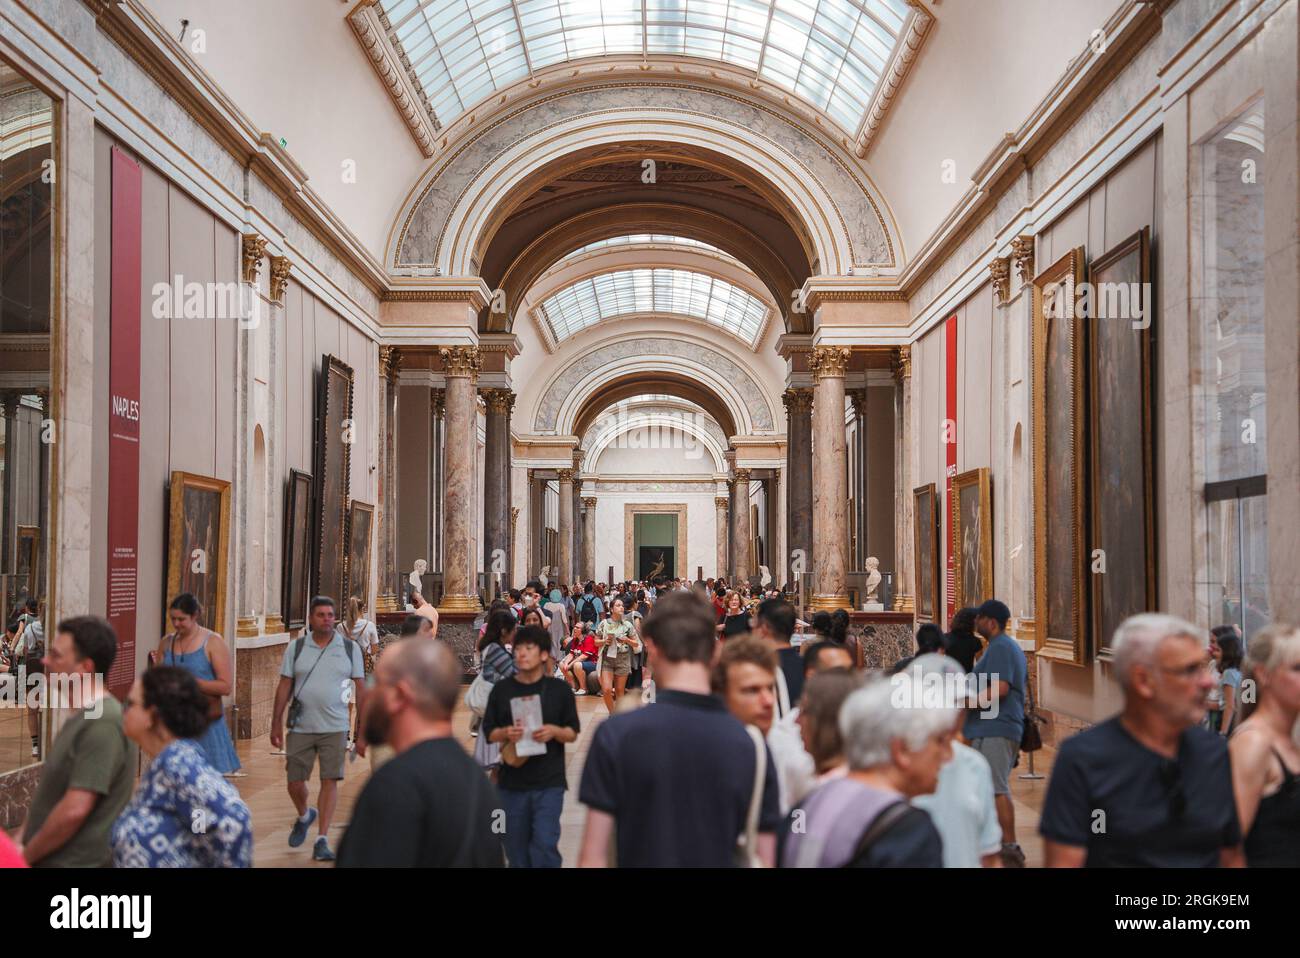 Crowd in Bright, Spacious Museum Stock Photo